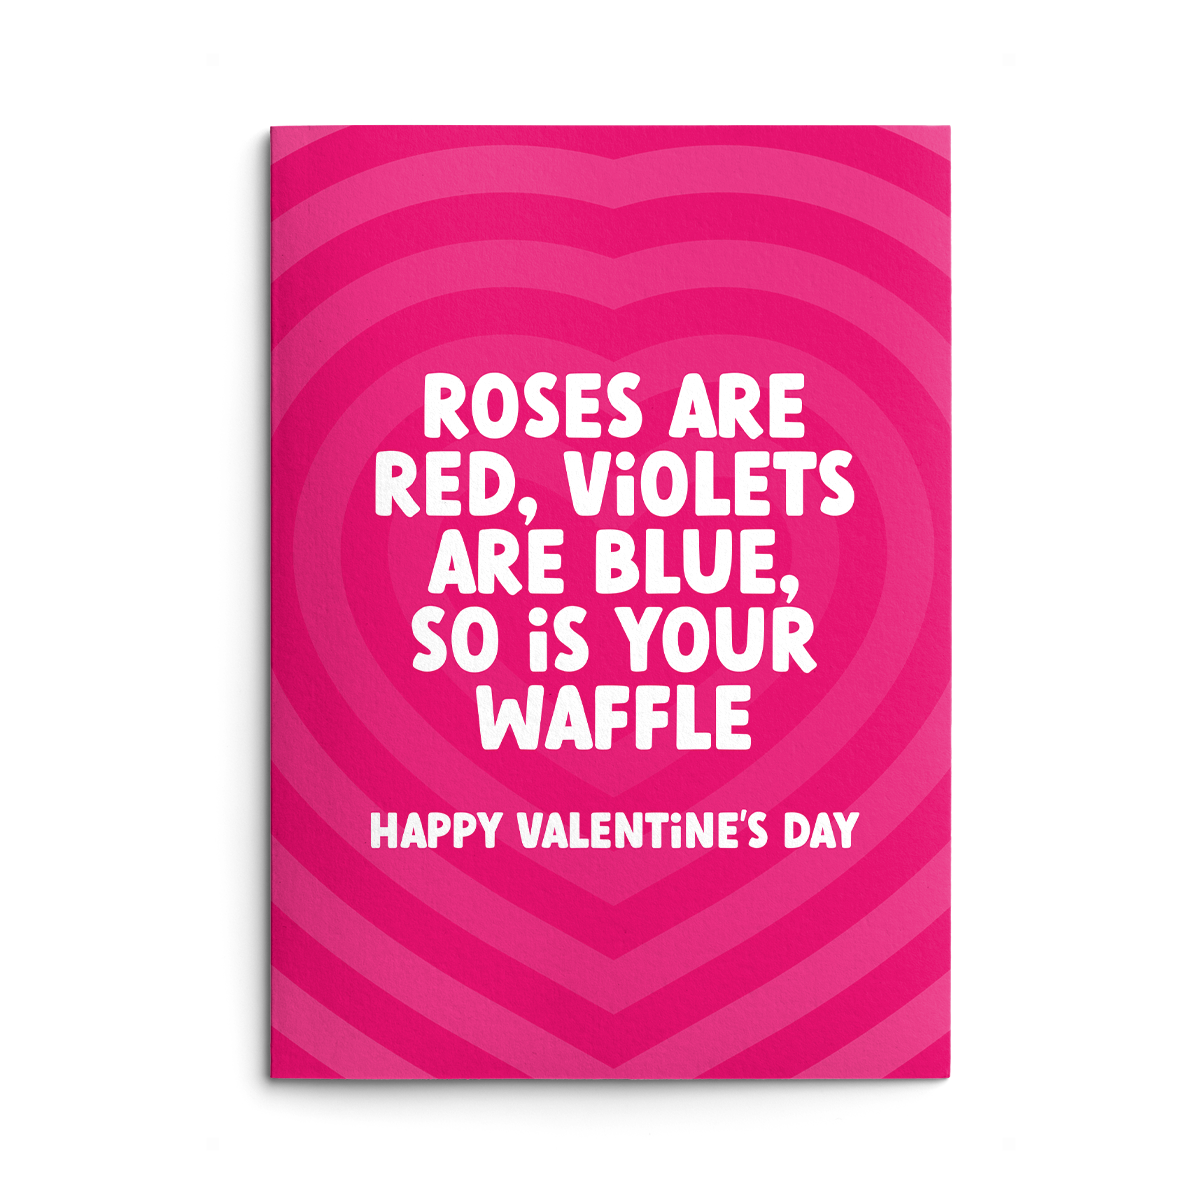 Blue Waffle Rude Valentines Card